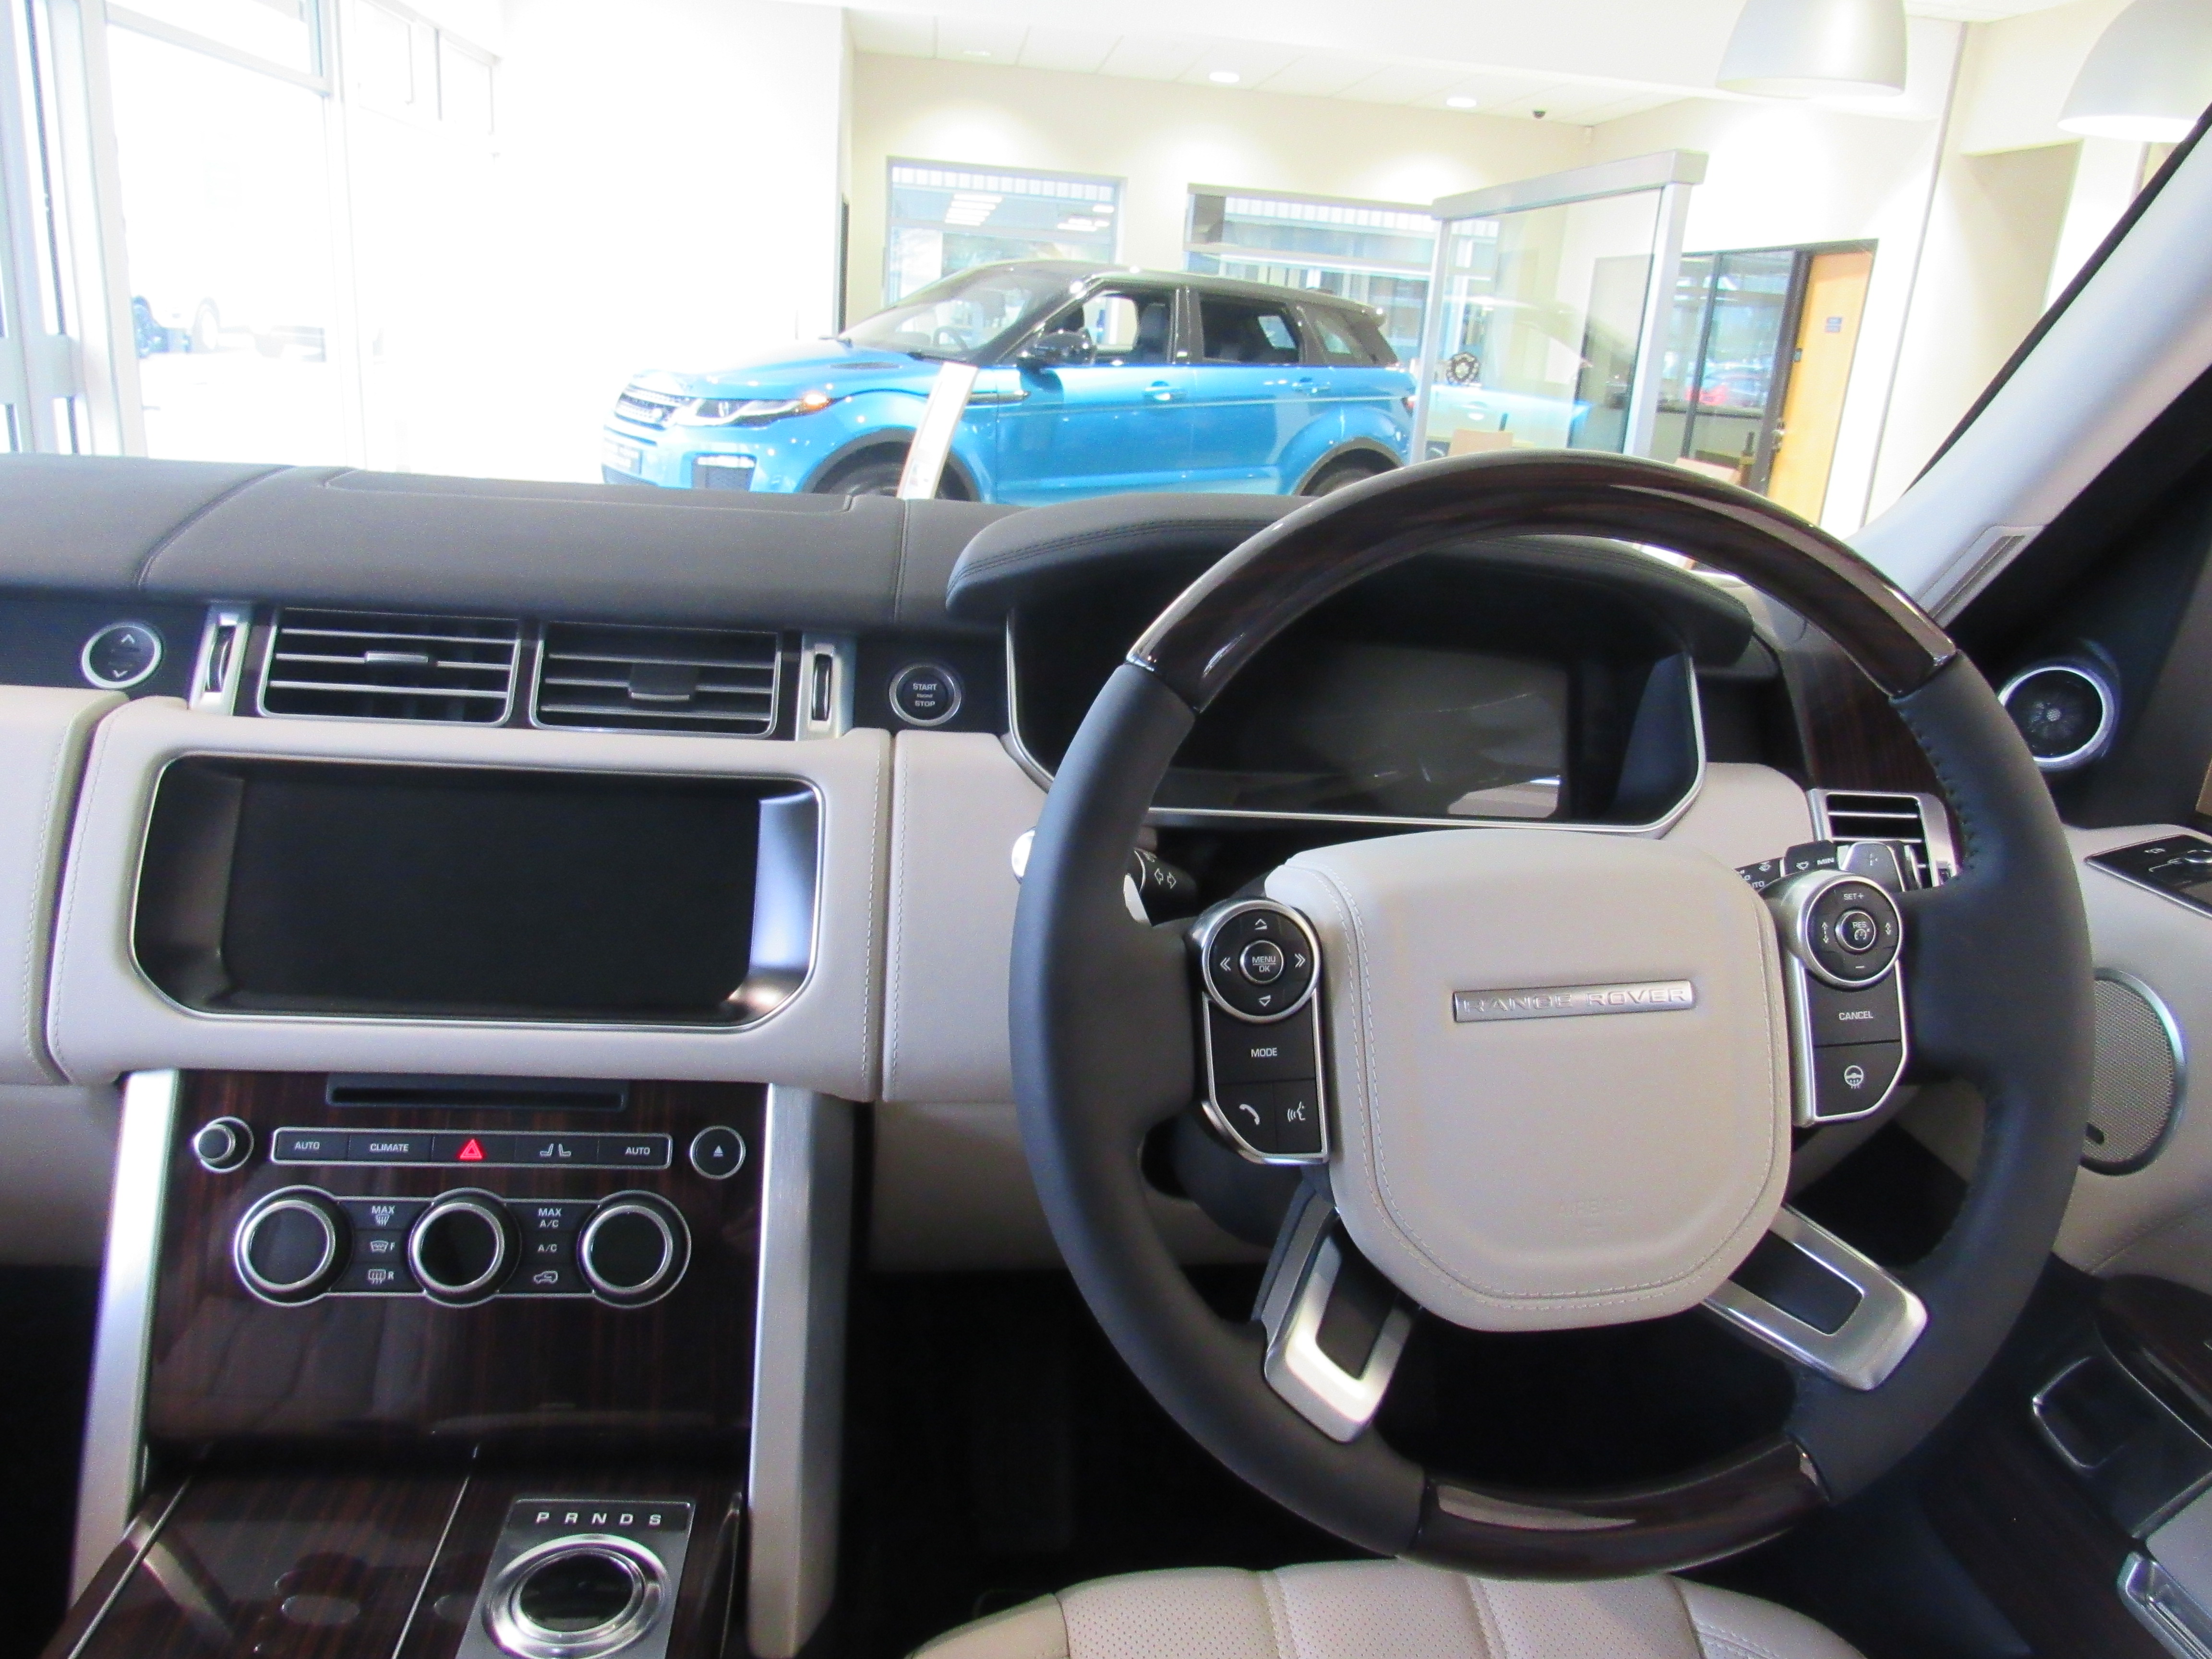 File 2017 Land Rover Range Rover Autobiography Lwb Interior Jpg Wikimedia Commons